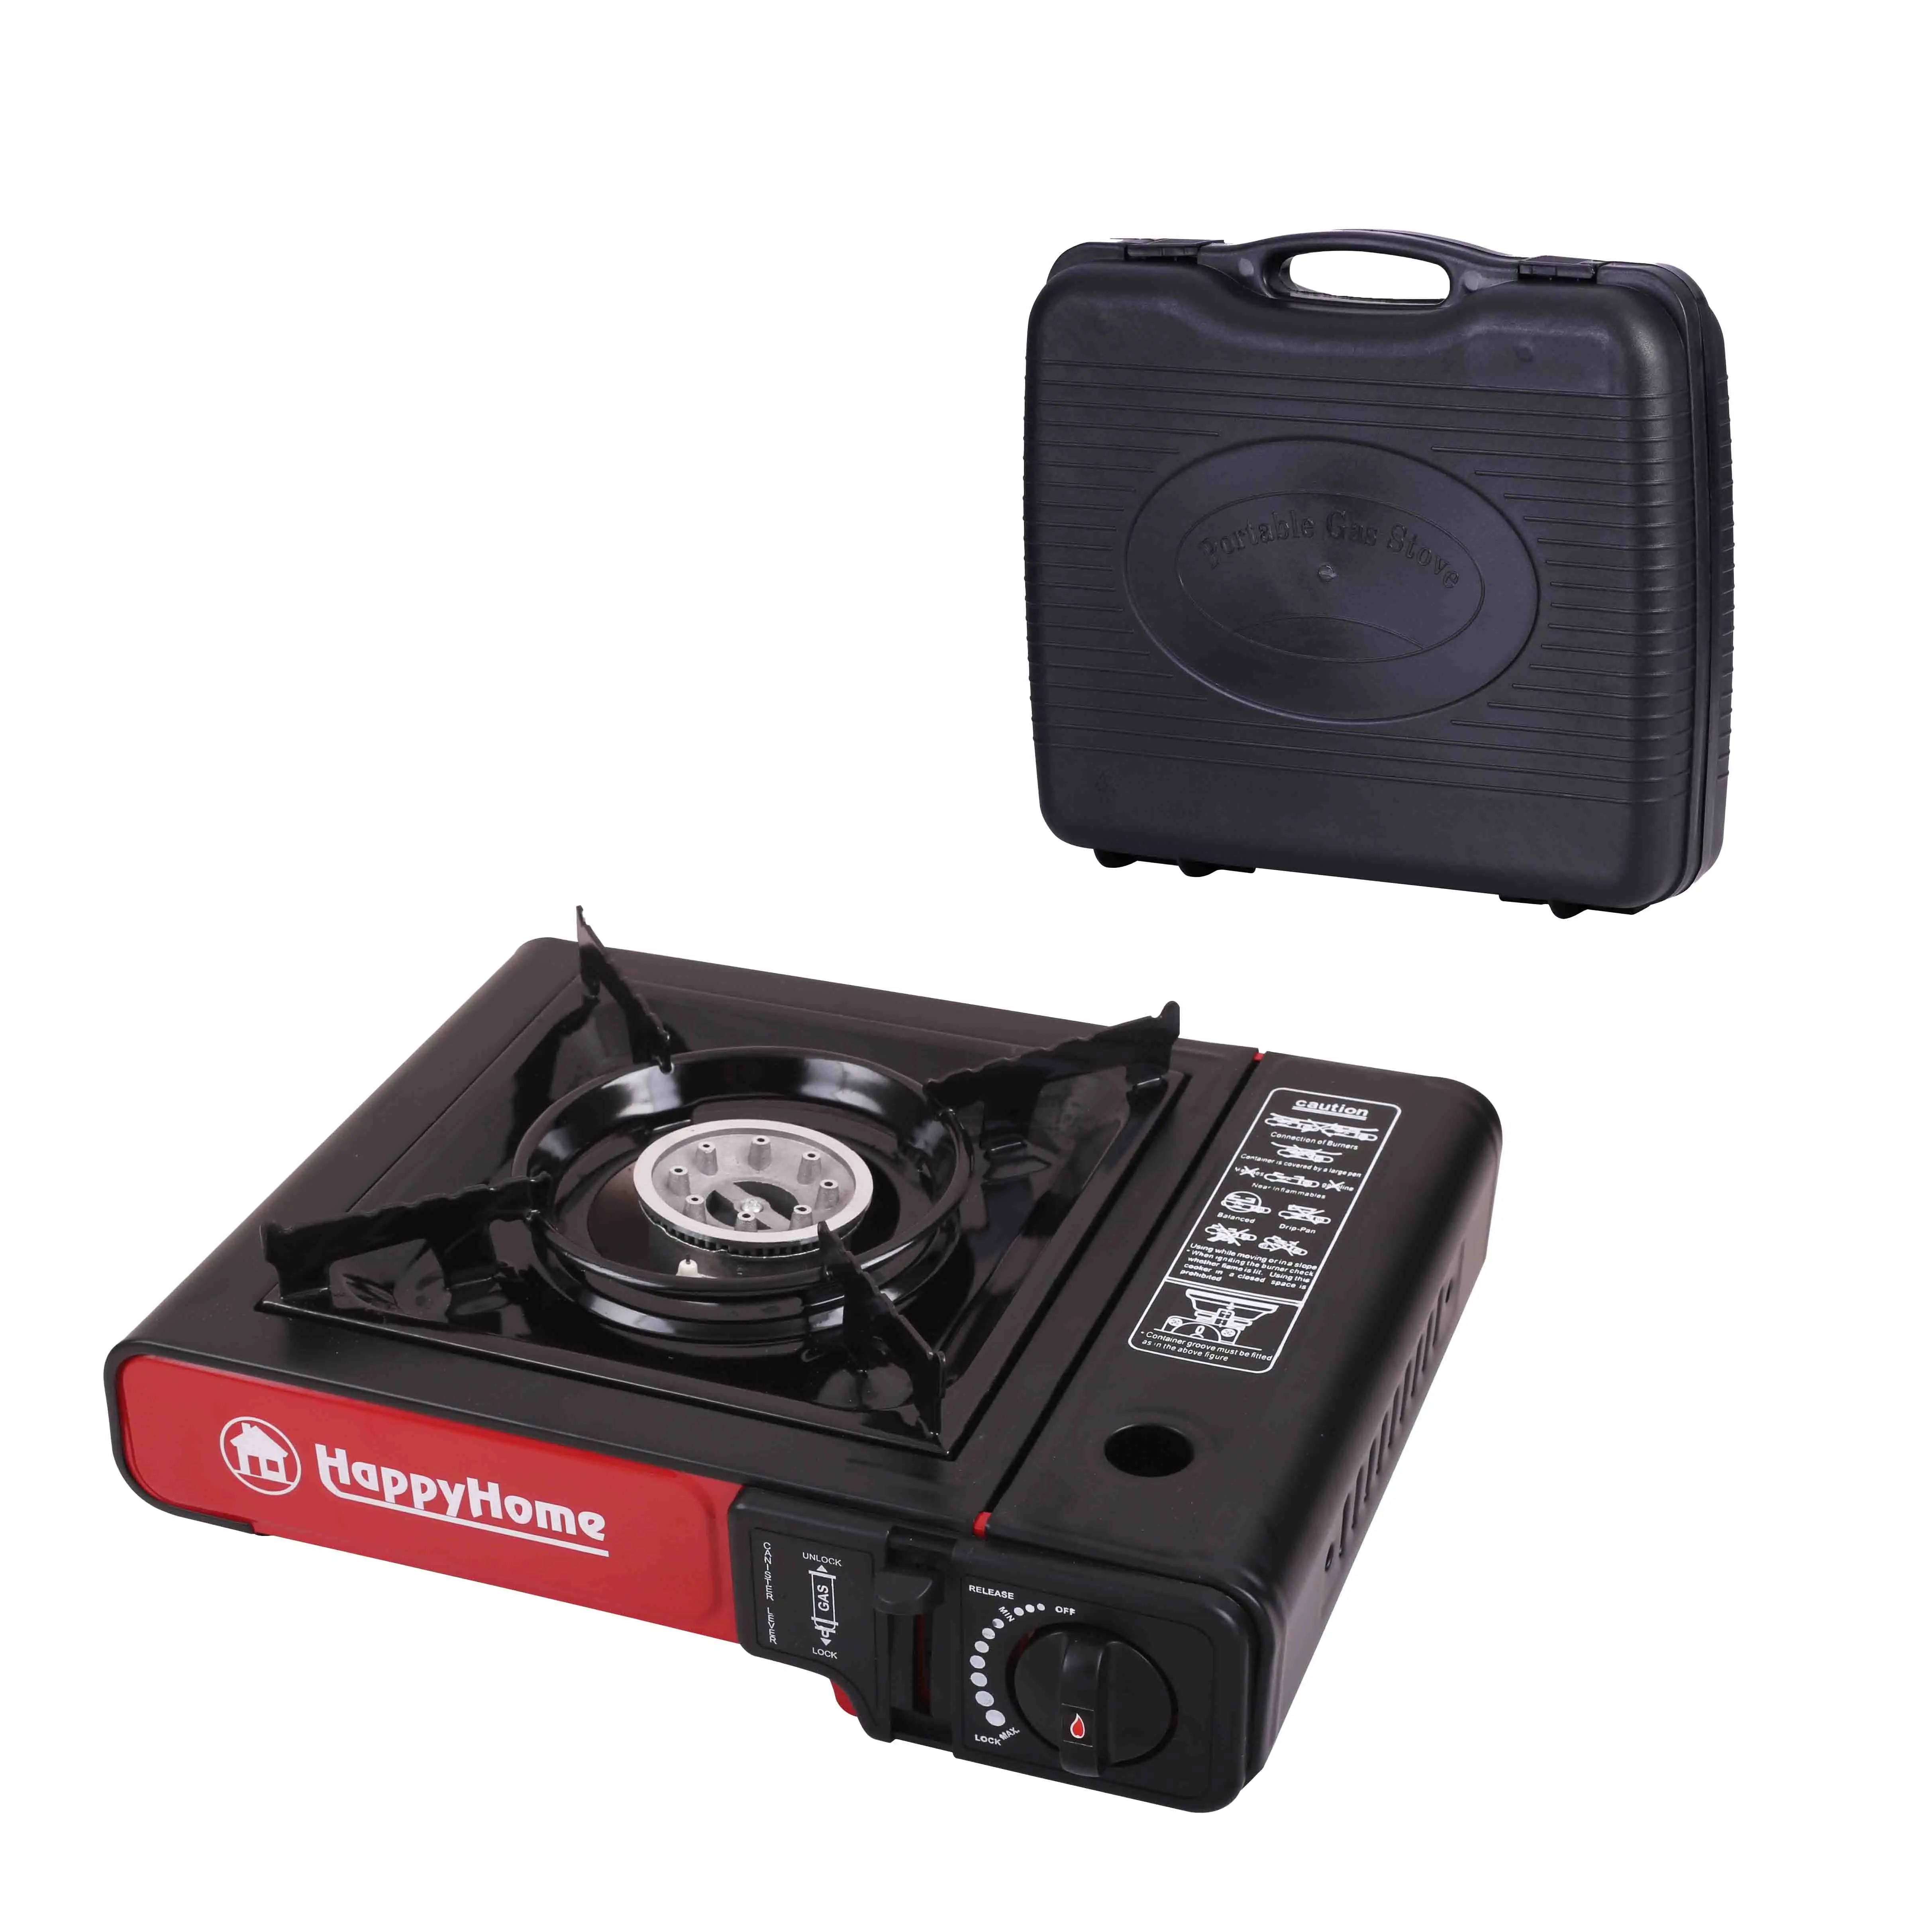 In Stock Cassette Furnace Portable Butane Gas Stove for Camping & Outdoor Activities with Plastic Box